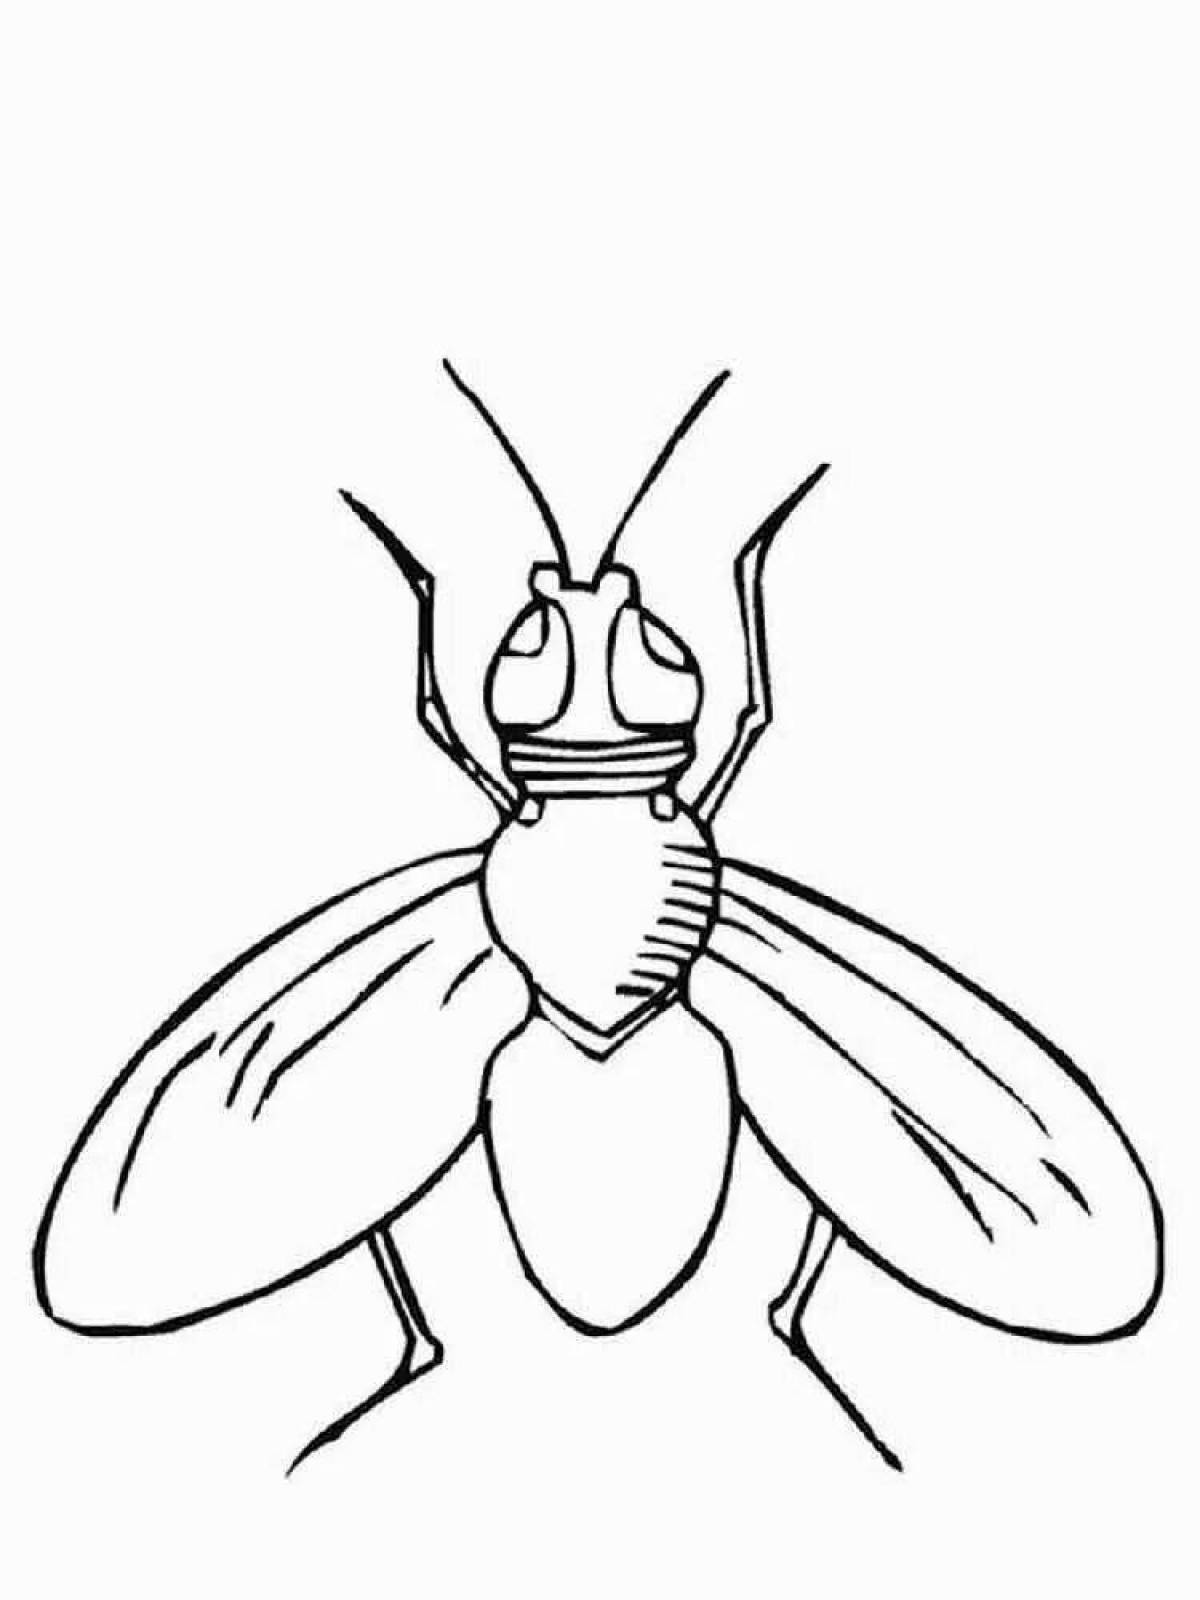 Glittering Flies Coloring Page for Kids